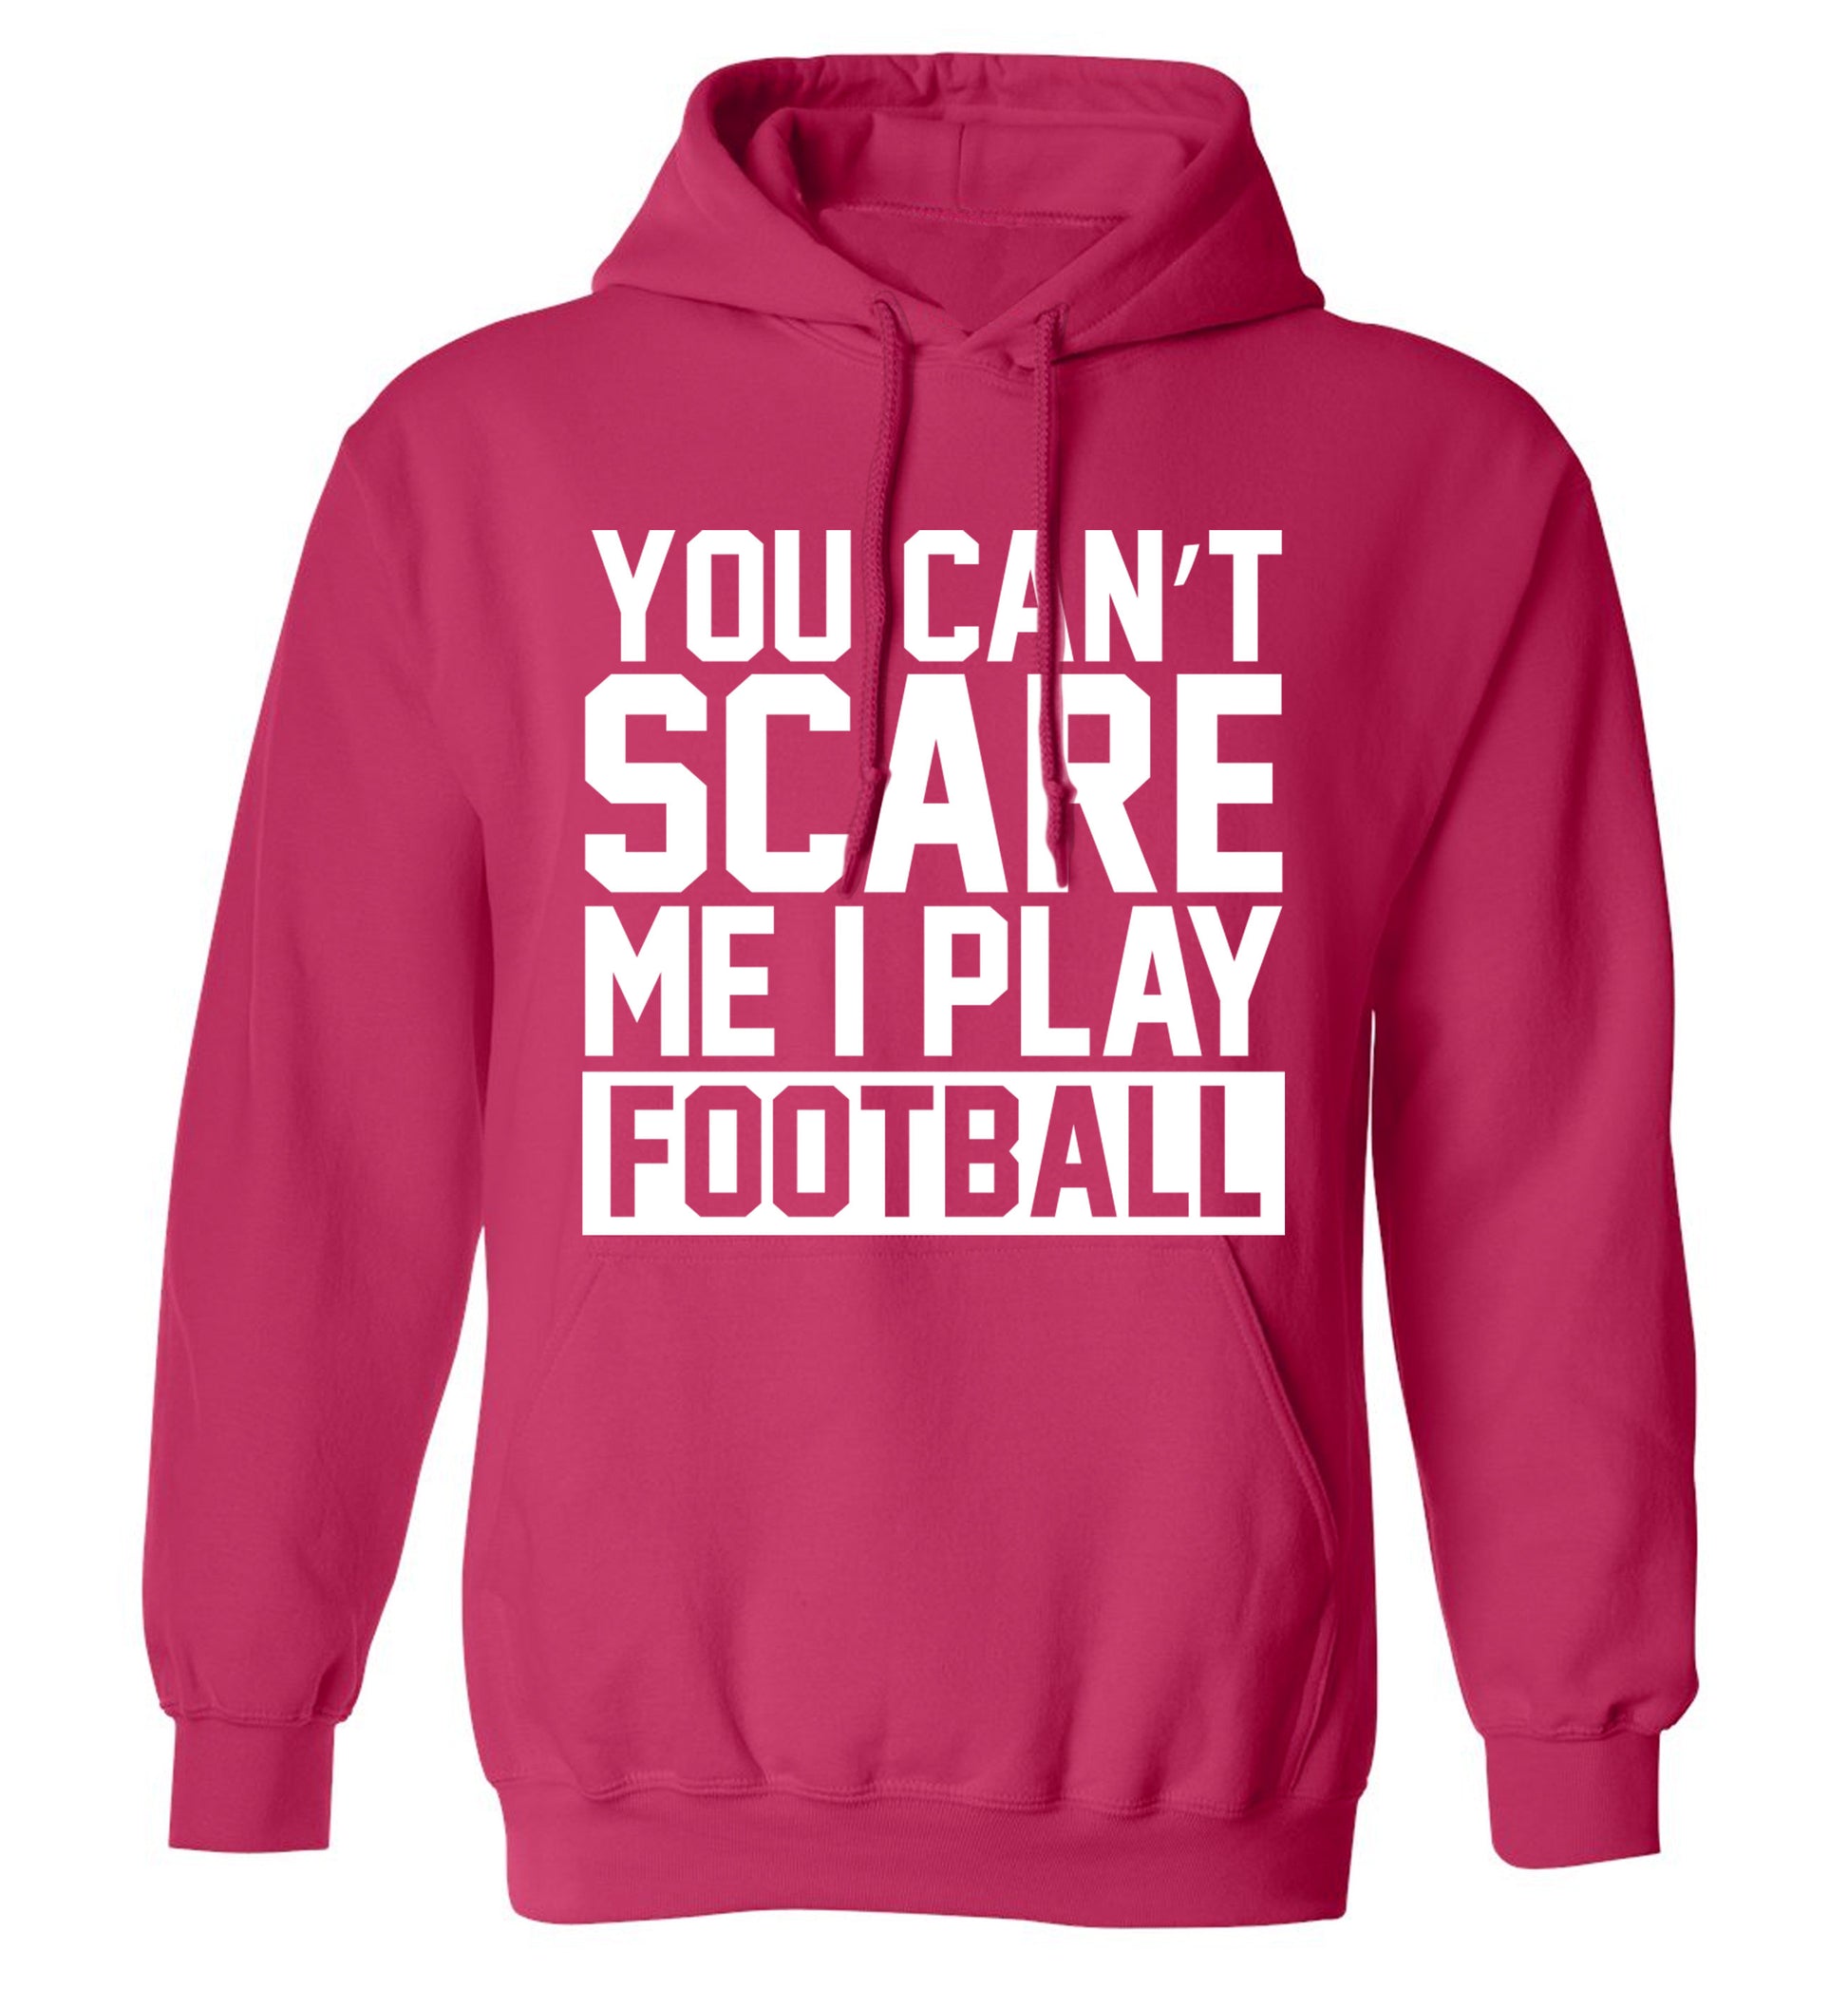 You can't scare me I play football adults unisex pink hoodie 2XL